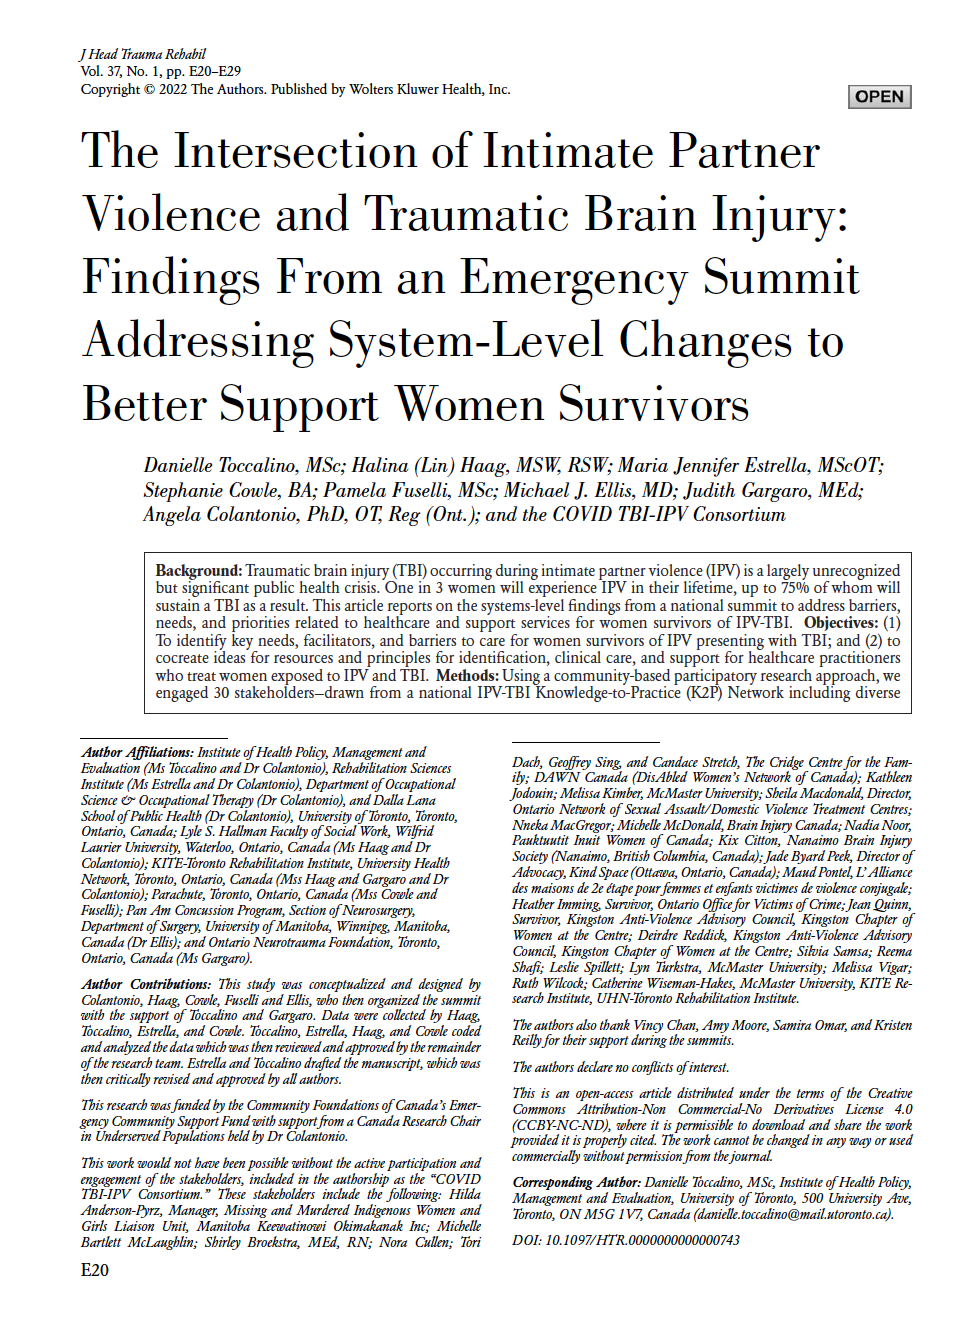 This document is about the intersection of intimate partner violence (IPV) and traumatic brain injury (TBI) and the findings from a national summit addressing system-level changes to better support women survivors.